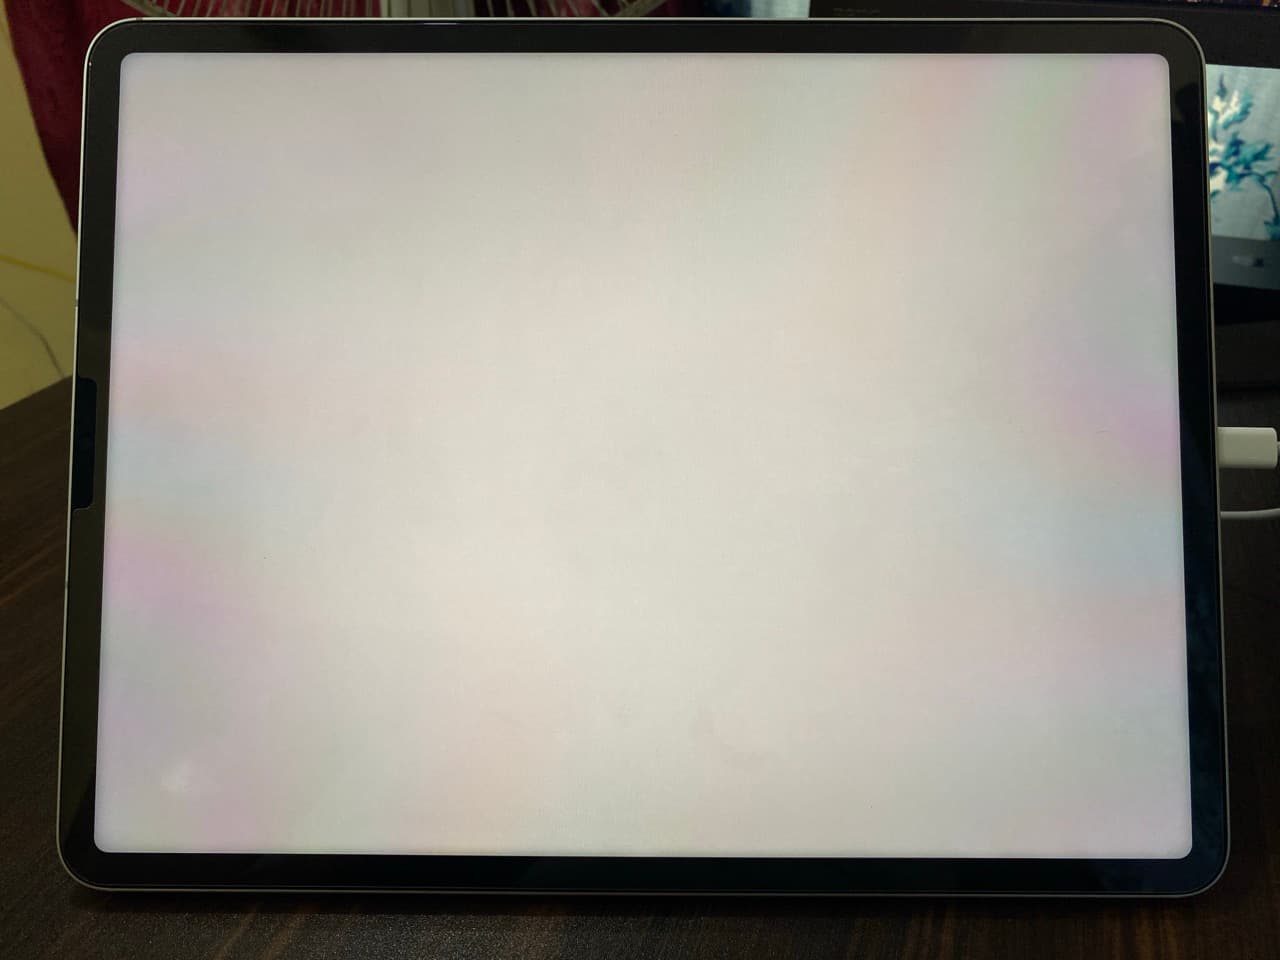 Seeing white screen during Assistive Access on iPad